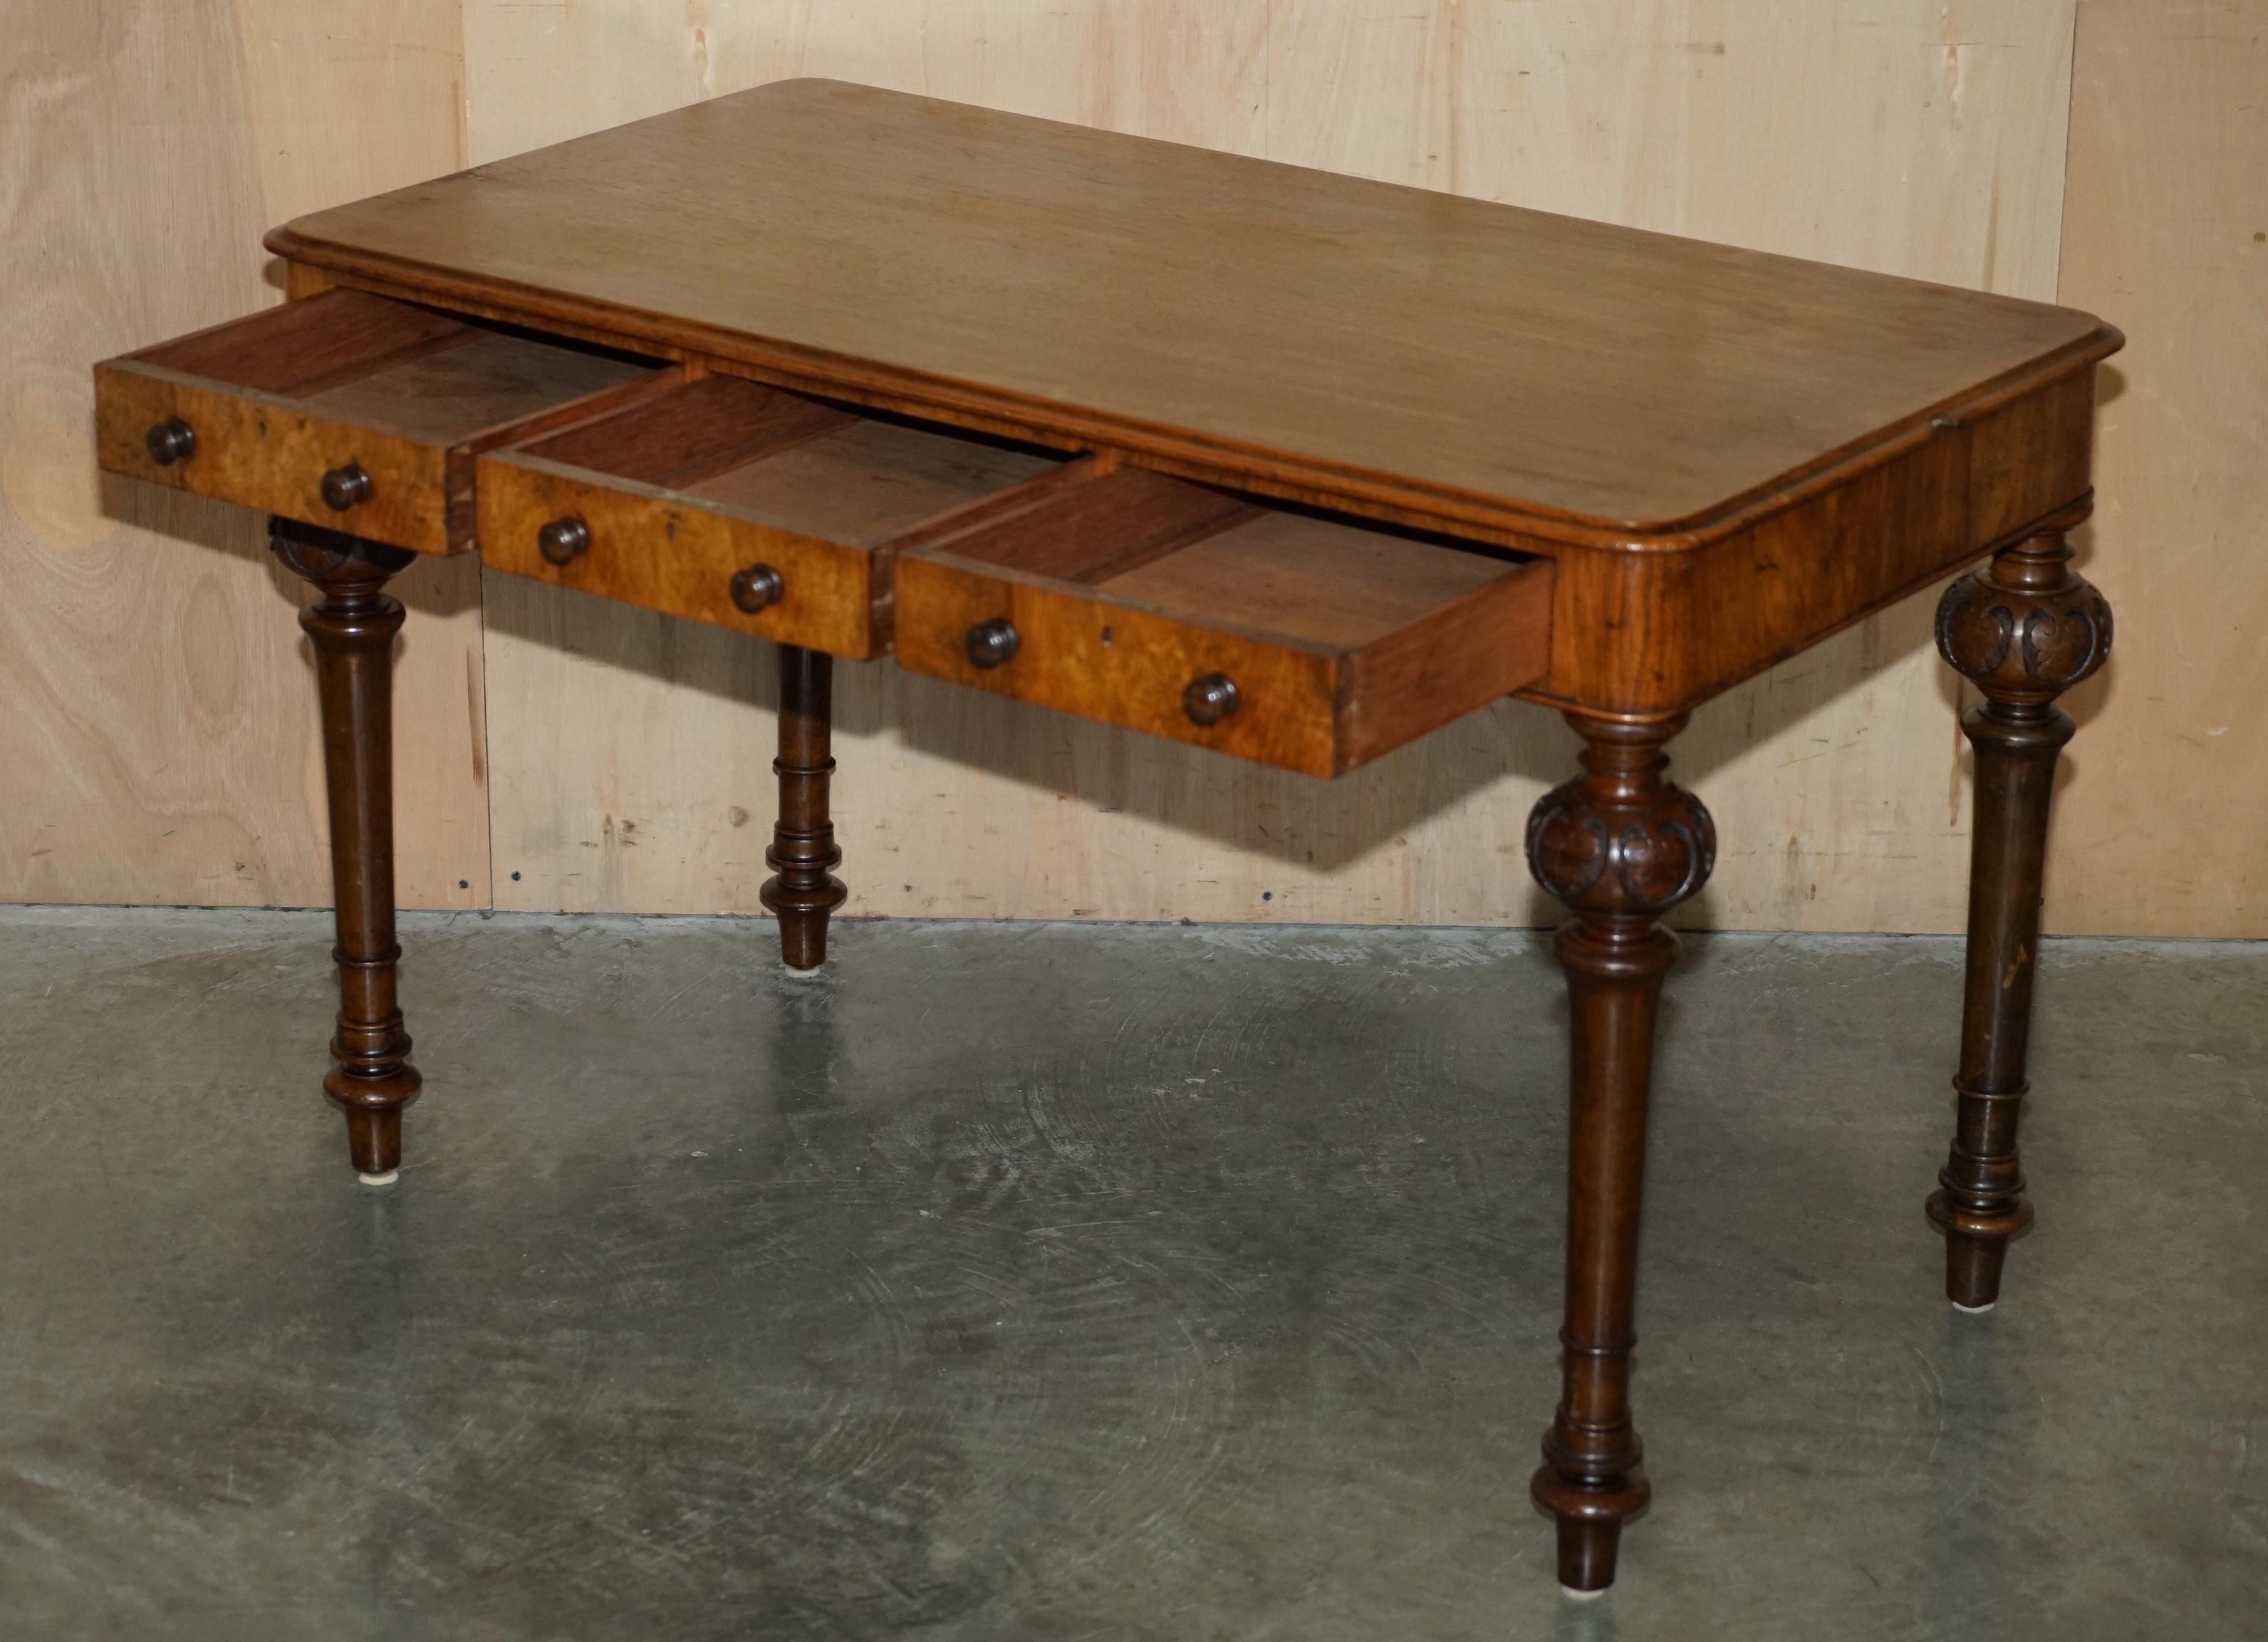 EXQUISITE SMALL WILLIAM IV CIRCA 1830 HARDWOOD WRiTING TABLE DESK CARVED LEGS For Sale 10